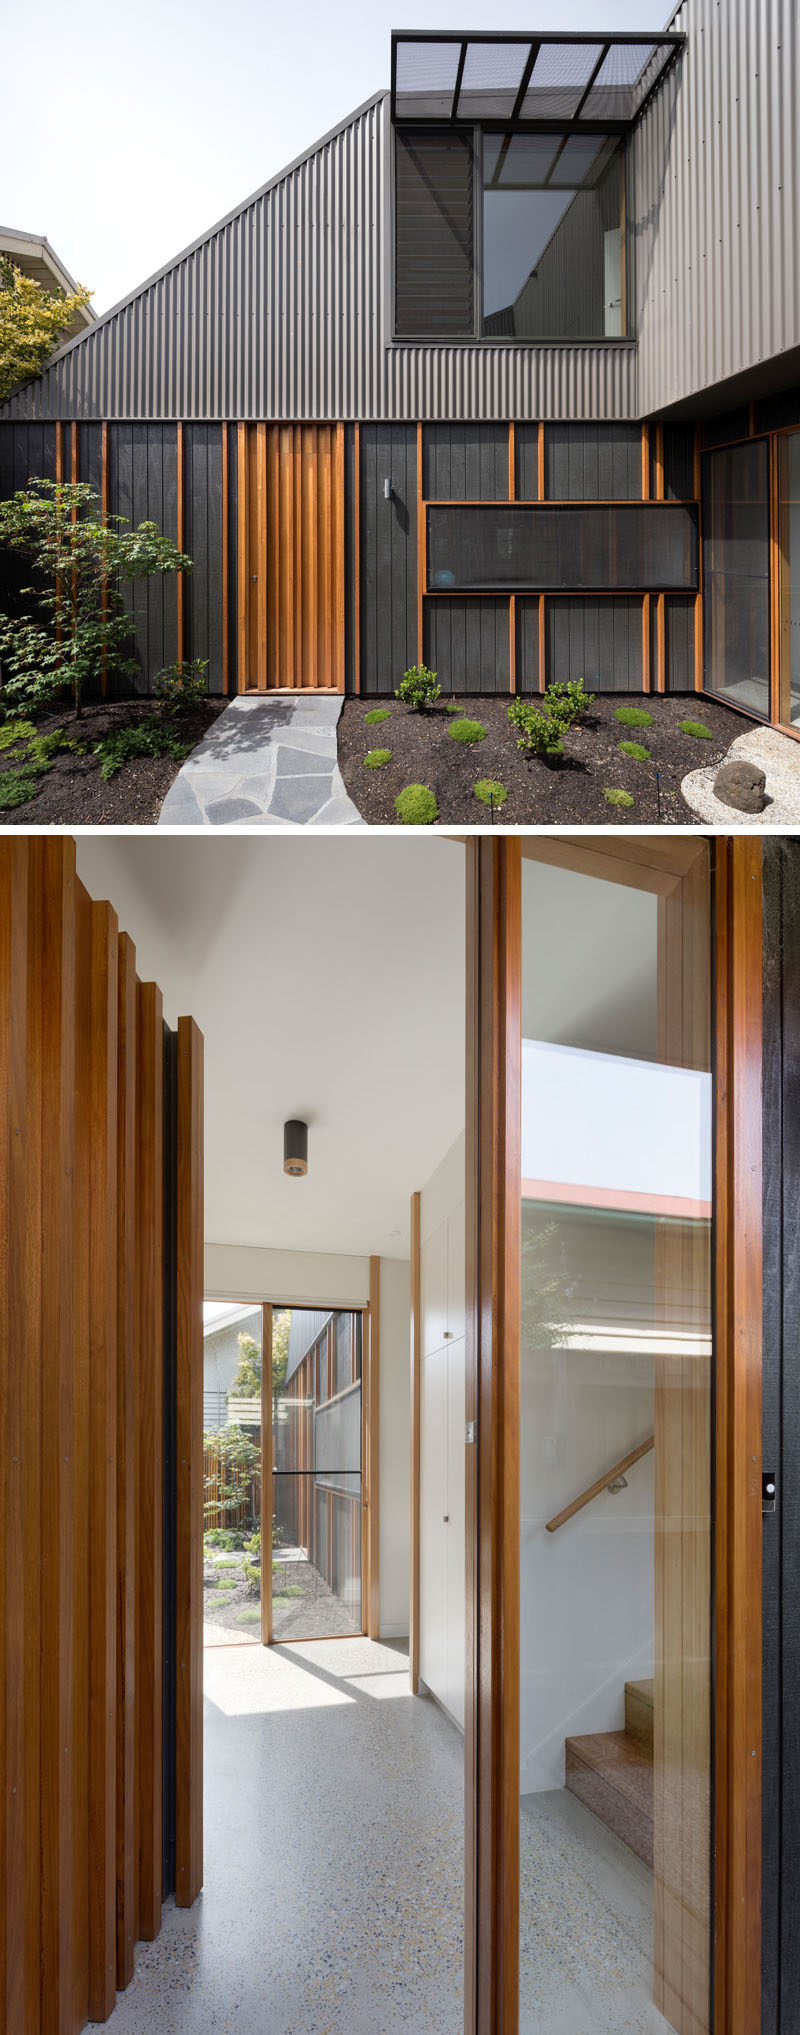 This modern house has hardwood battens that conceal joints in the cladding add texture to the facade, and allow the front door to blend in with the exterior. #ModernHouse #WoodFrontDoor #HouseDesign #Architecture